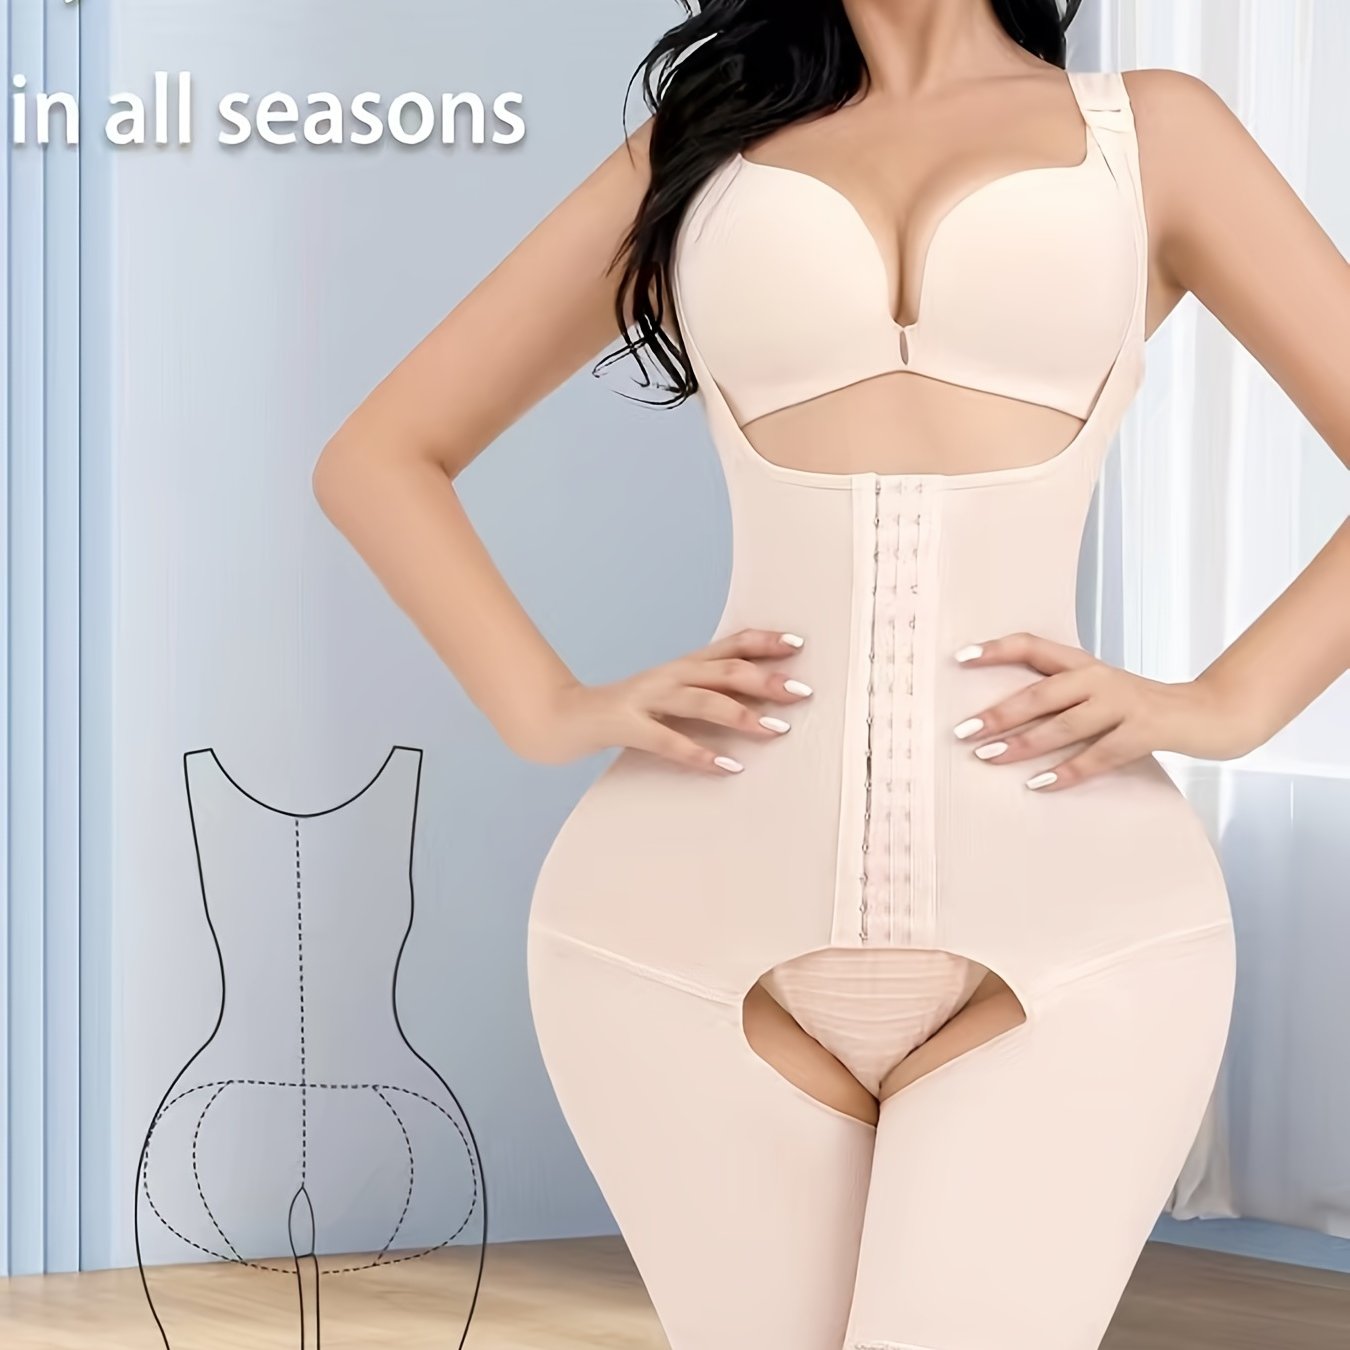 Full Body Klopp Shaper For Women Slimming Bodysuit With Open Crotch Corset  And Waist Trainer For Shaping And Underwear Postpar235P From Qljmw, $24.11